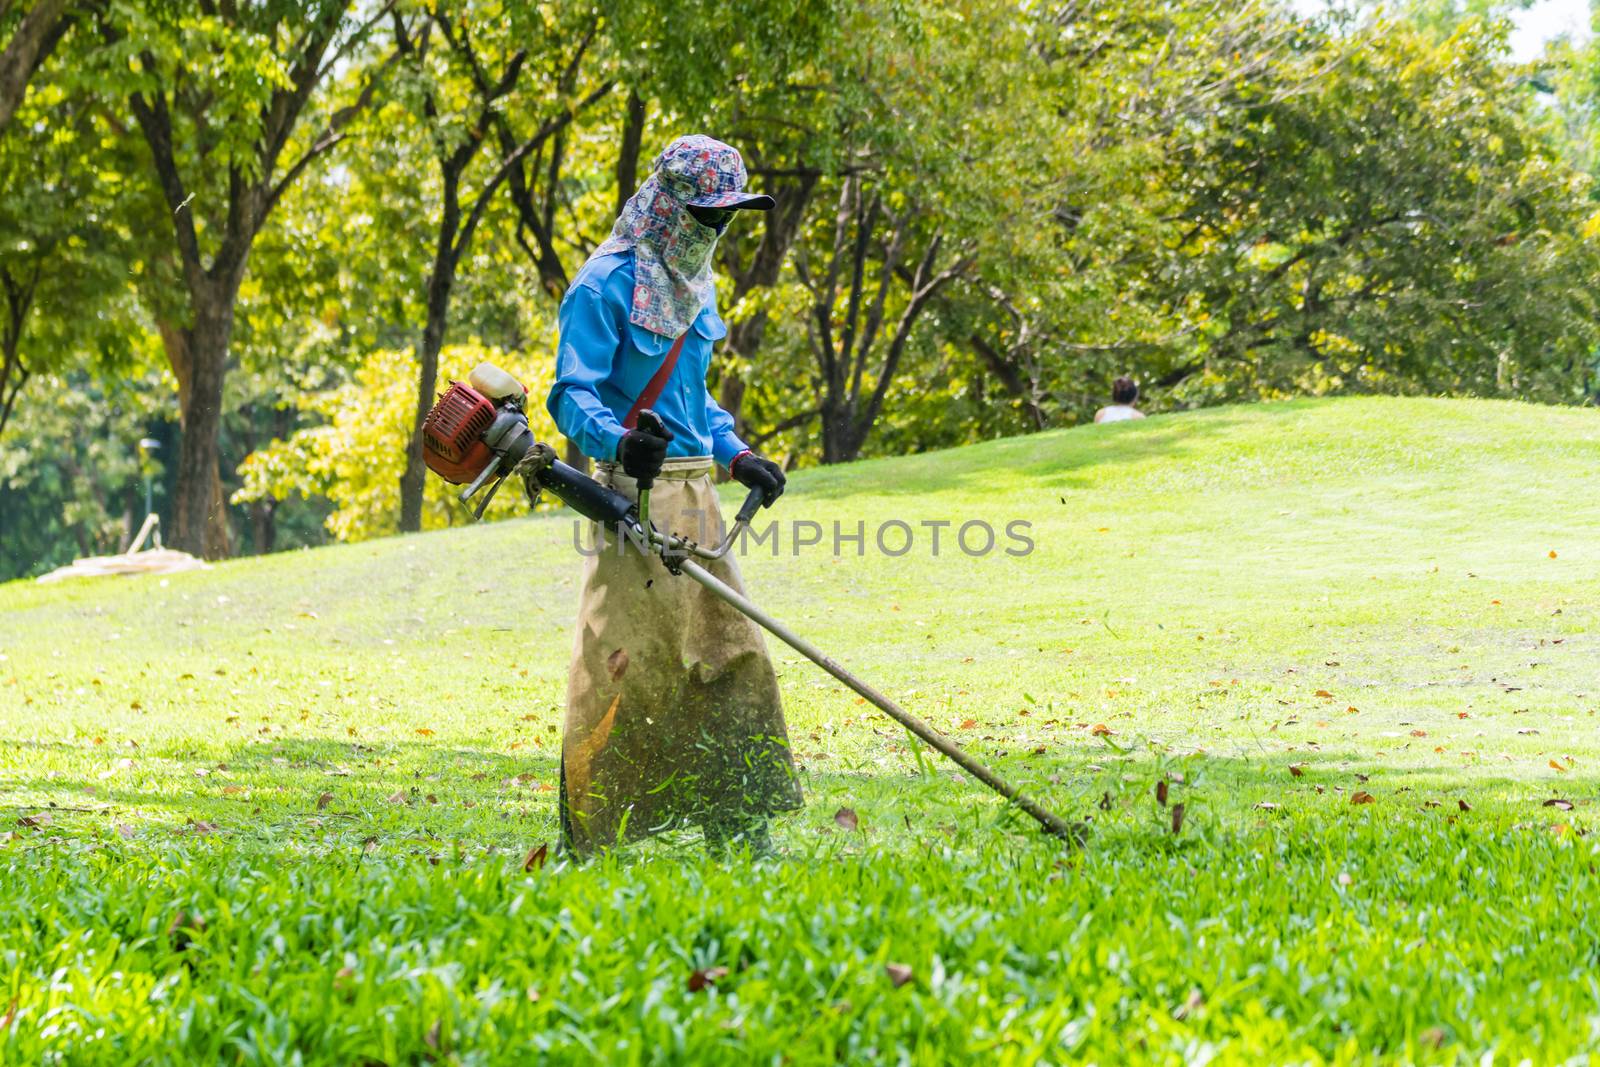 lawn mower worker man cutting grass in green field park by pitchaphan